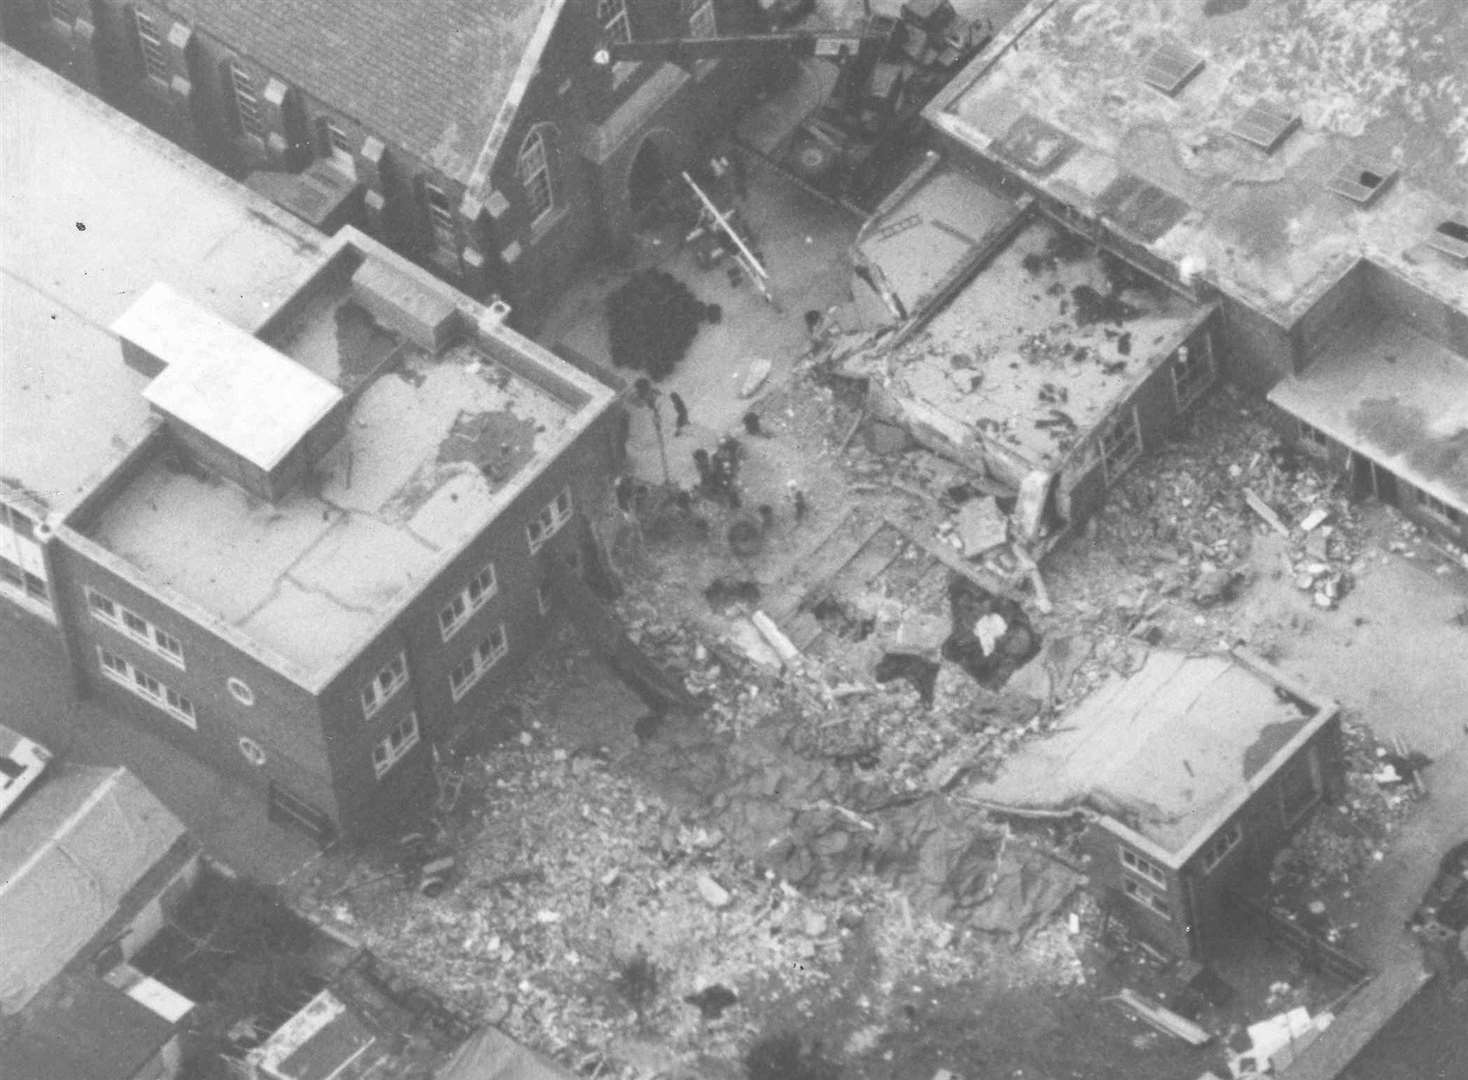 The Music School building destroyed by the bomb blast